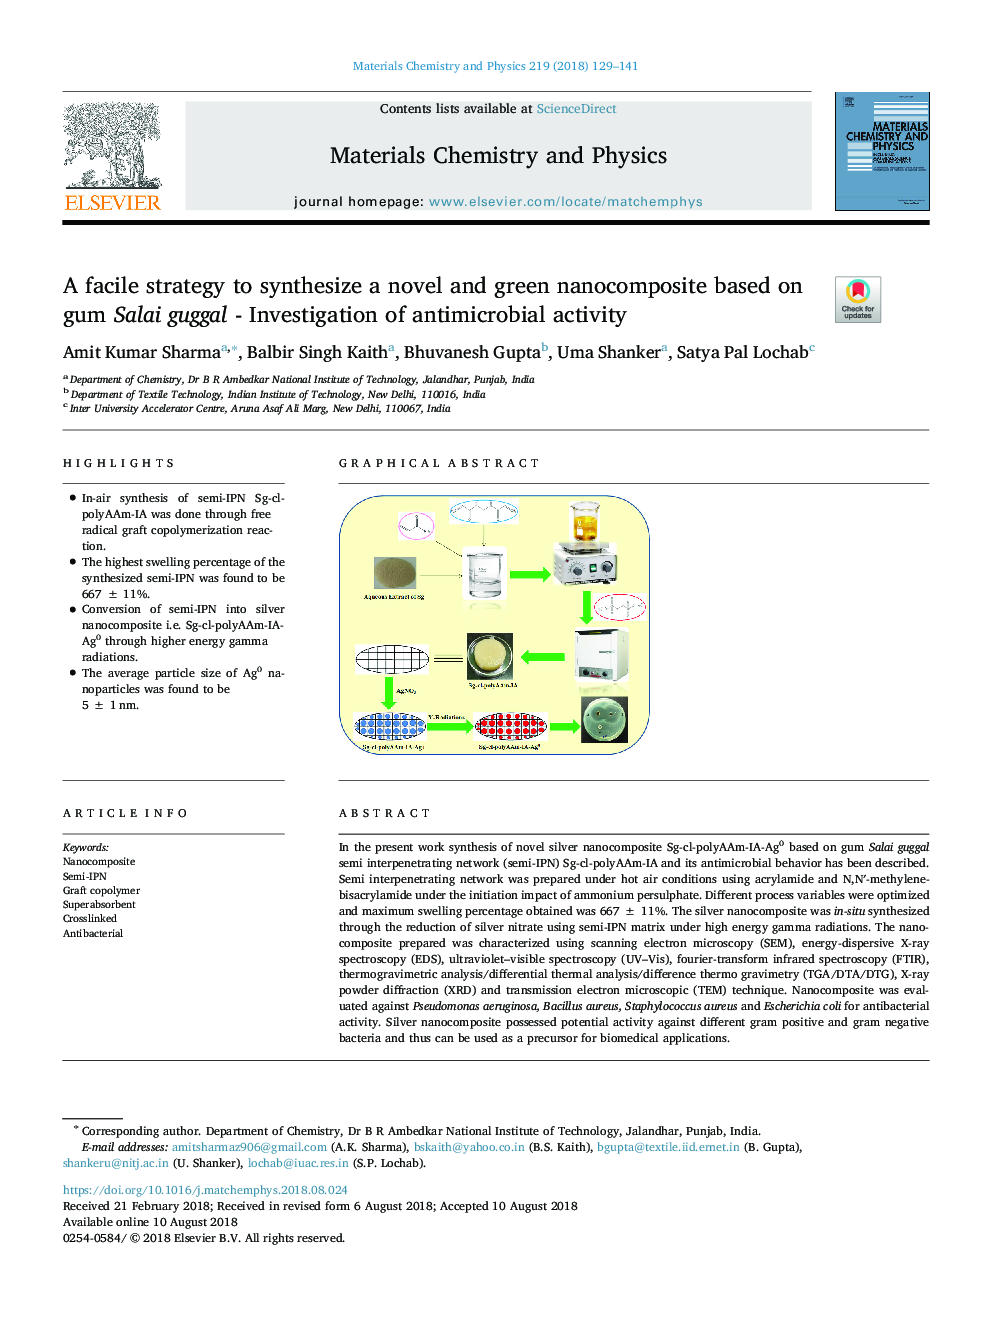 A facile strategy to synthesize a novel and green nanocomposite based on gum Salai guggal - Investigation of antimicrobial activity